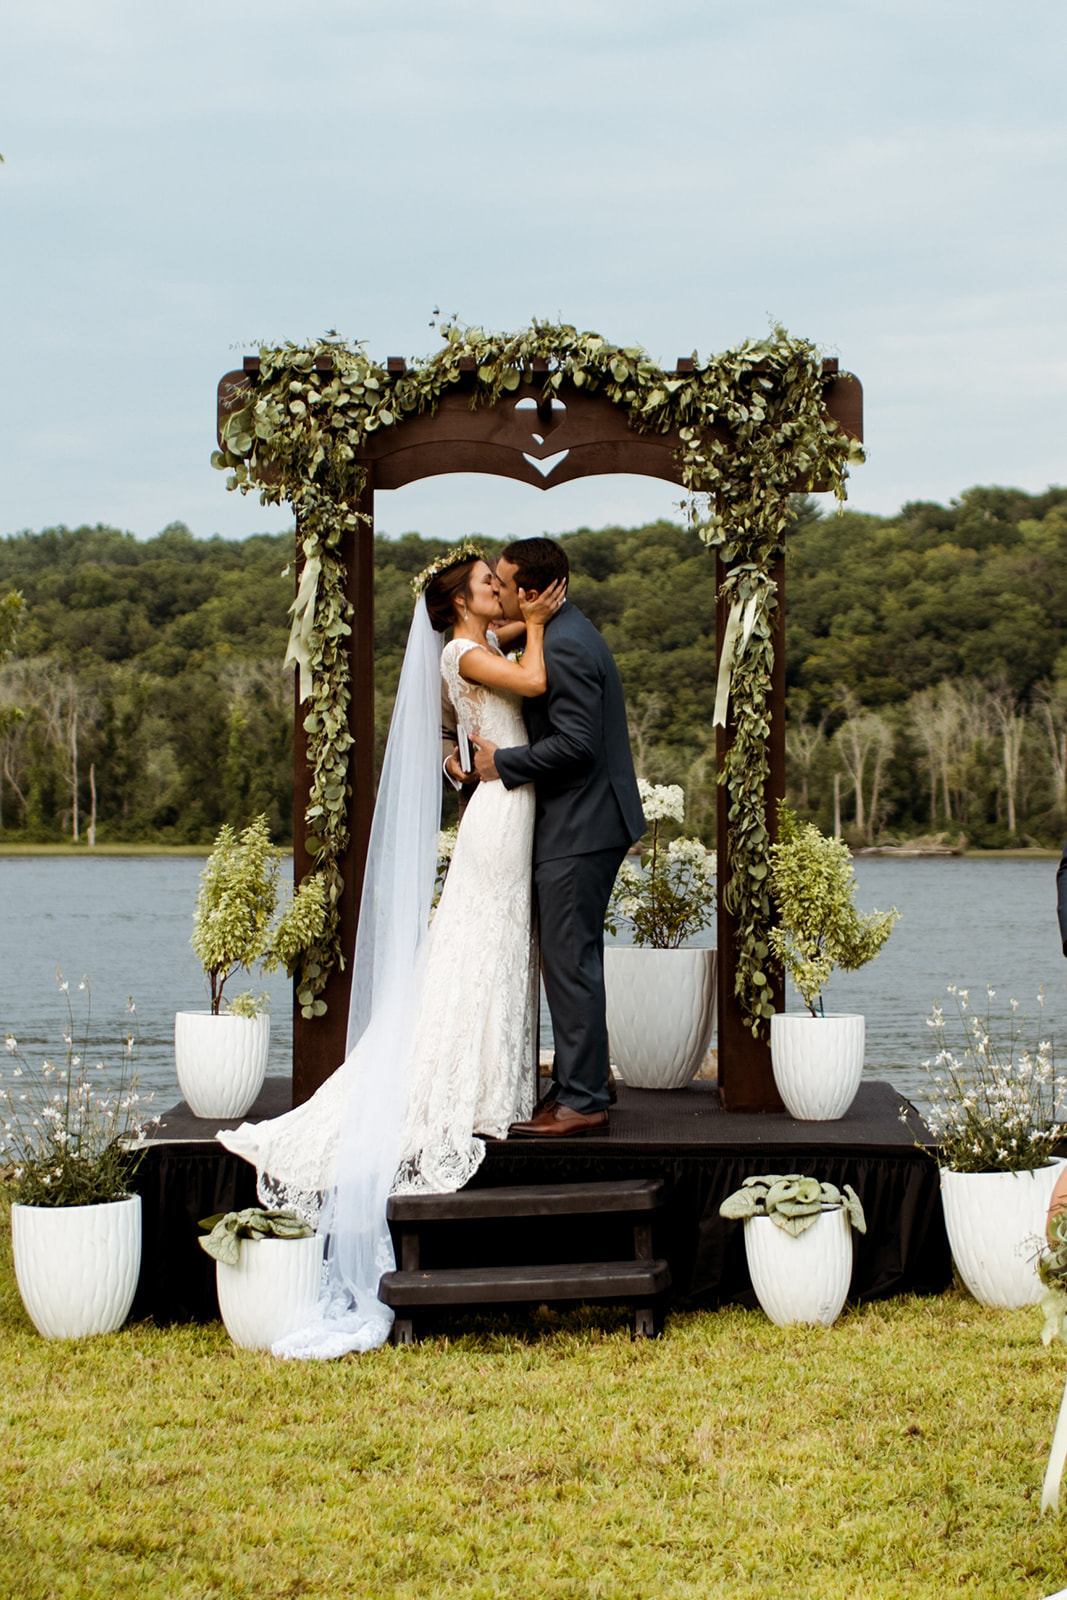 Sommar & Ben's wedding by the water in Connecticut. Wooden wedding arch way and white potted plants for the ceremony decor. - Pearl Weddings & Events